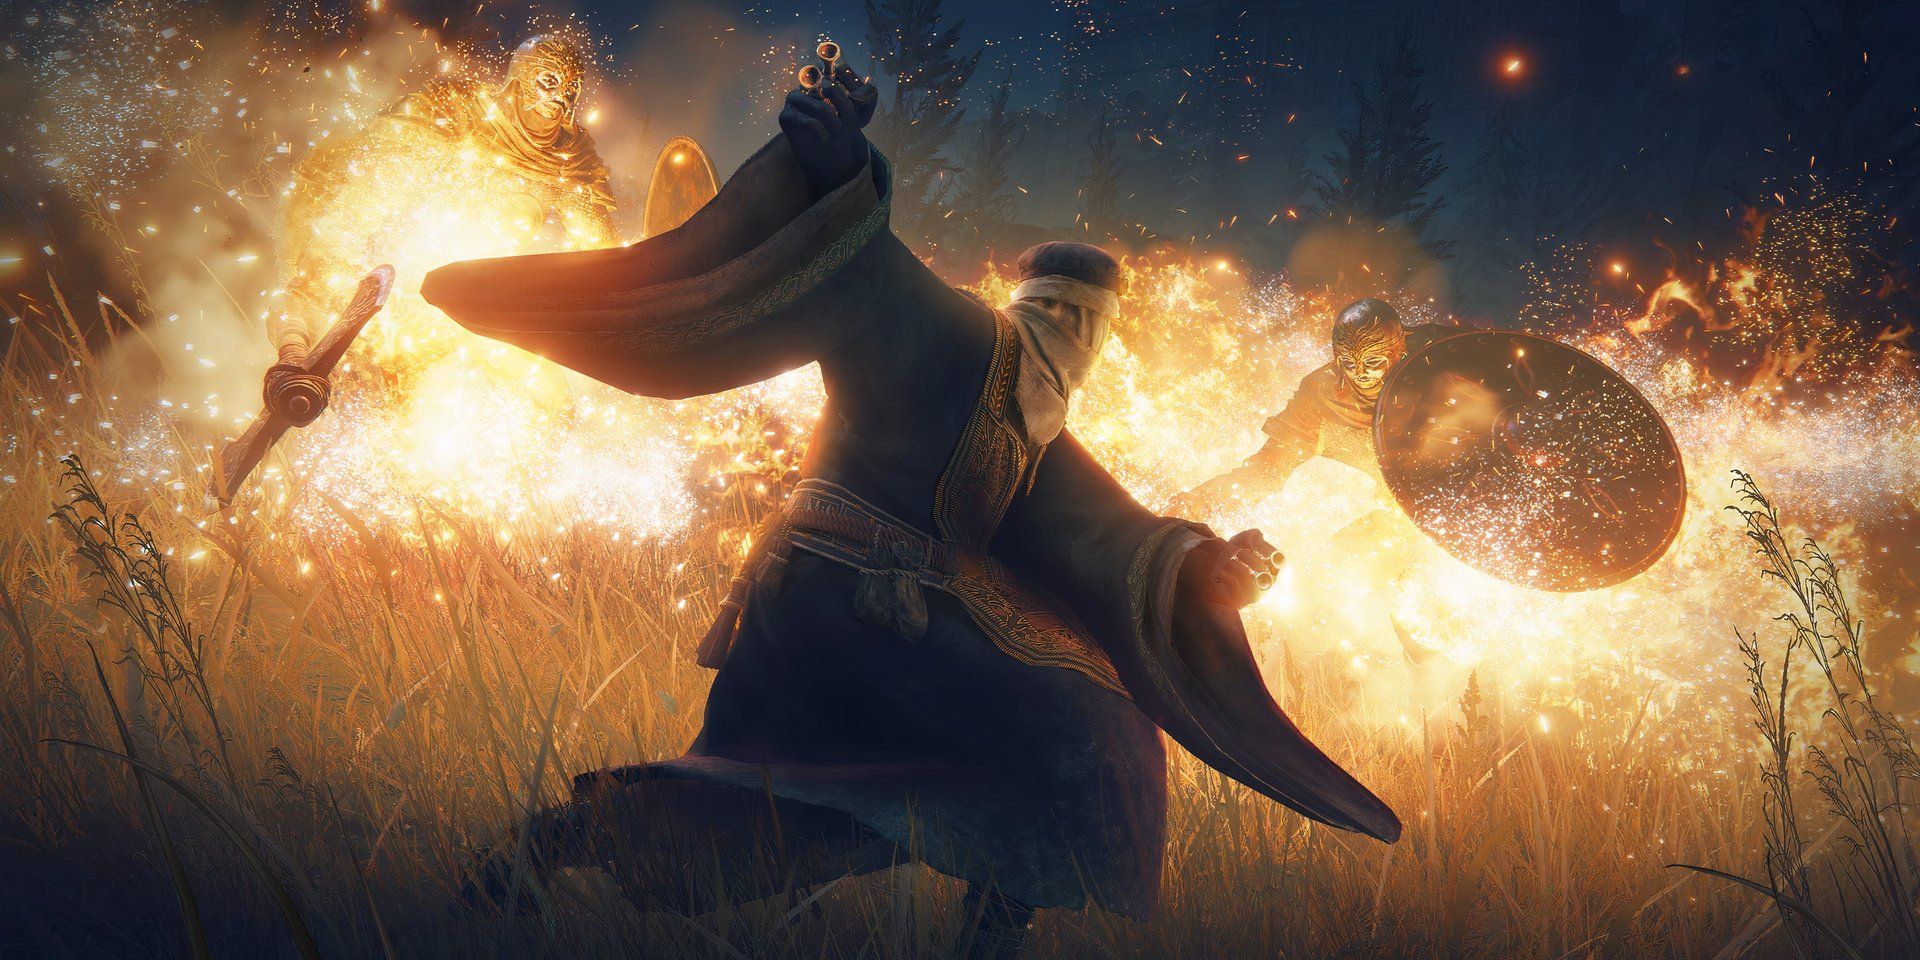 A player character wearing a robe uses a perfume bottle to spread fire throughout the battlefield, consuming shield-bearing enemies with flame in a screenshot from Elden Ring.